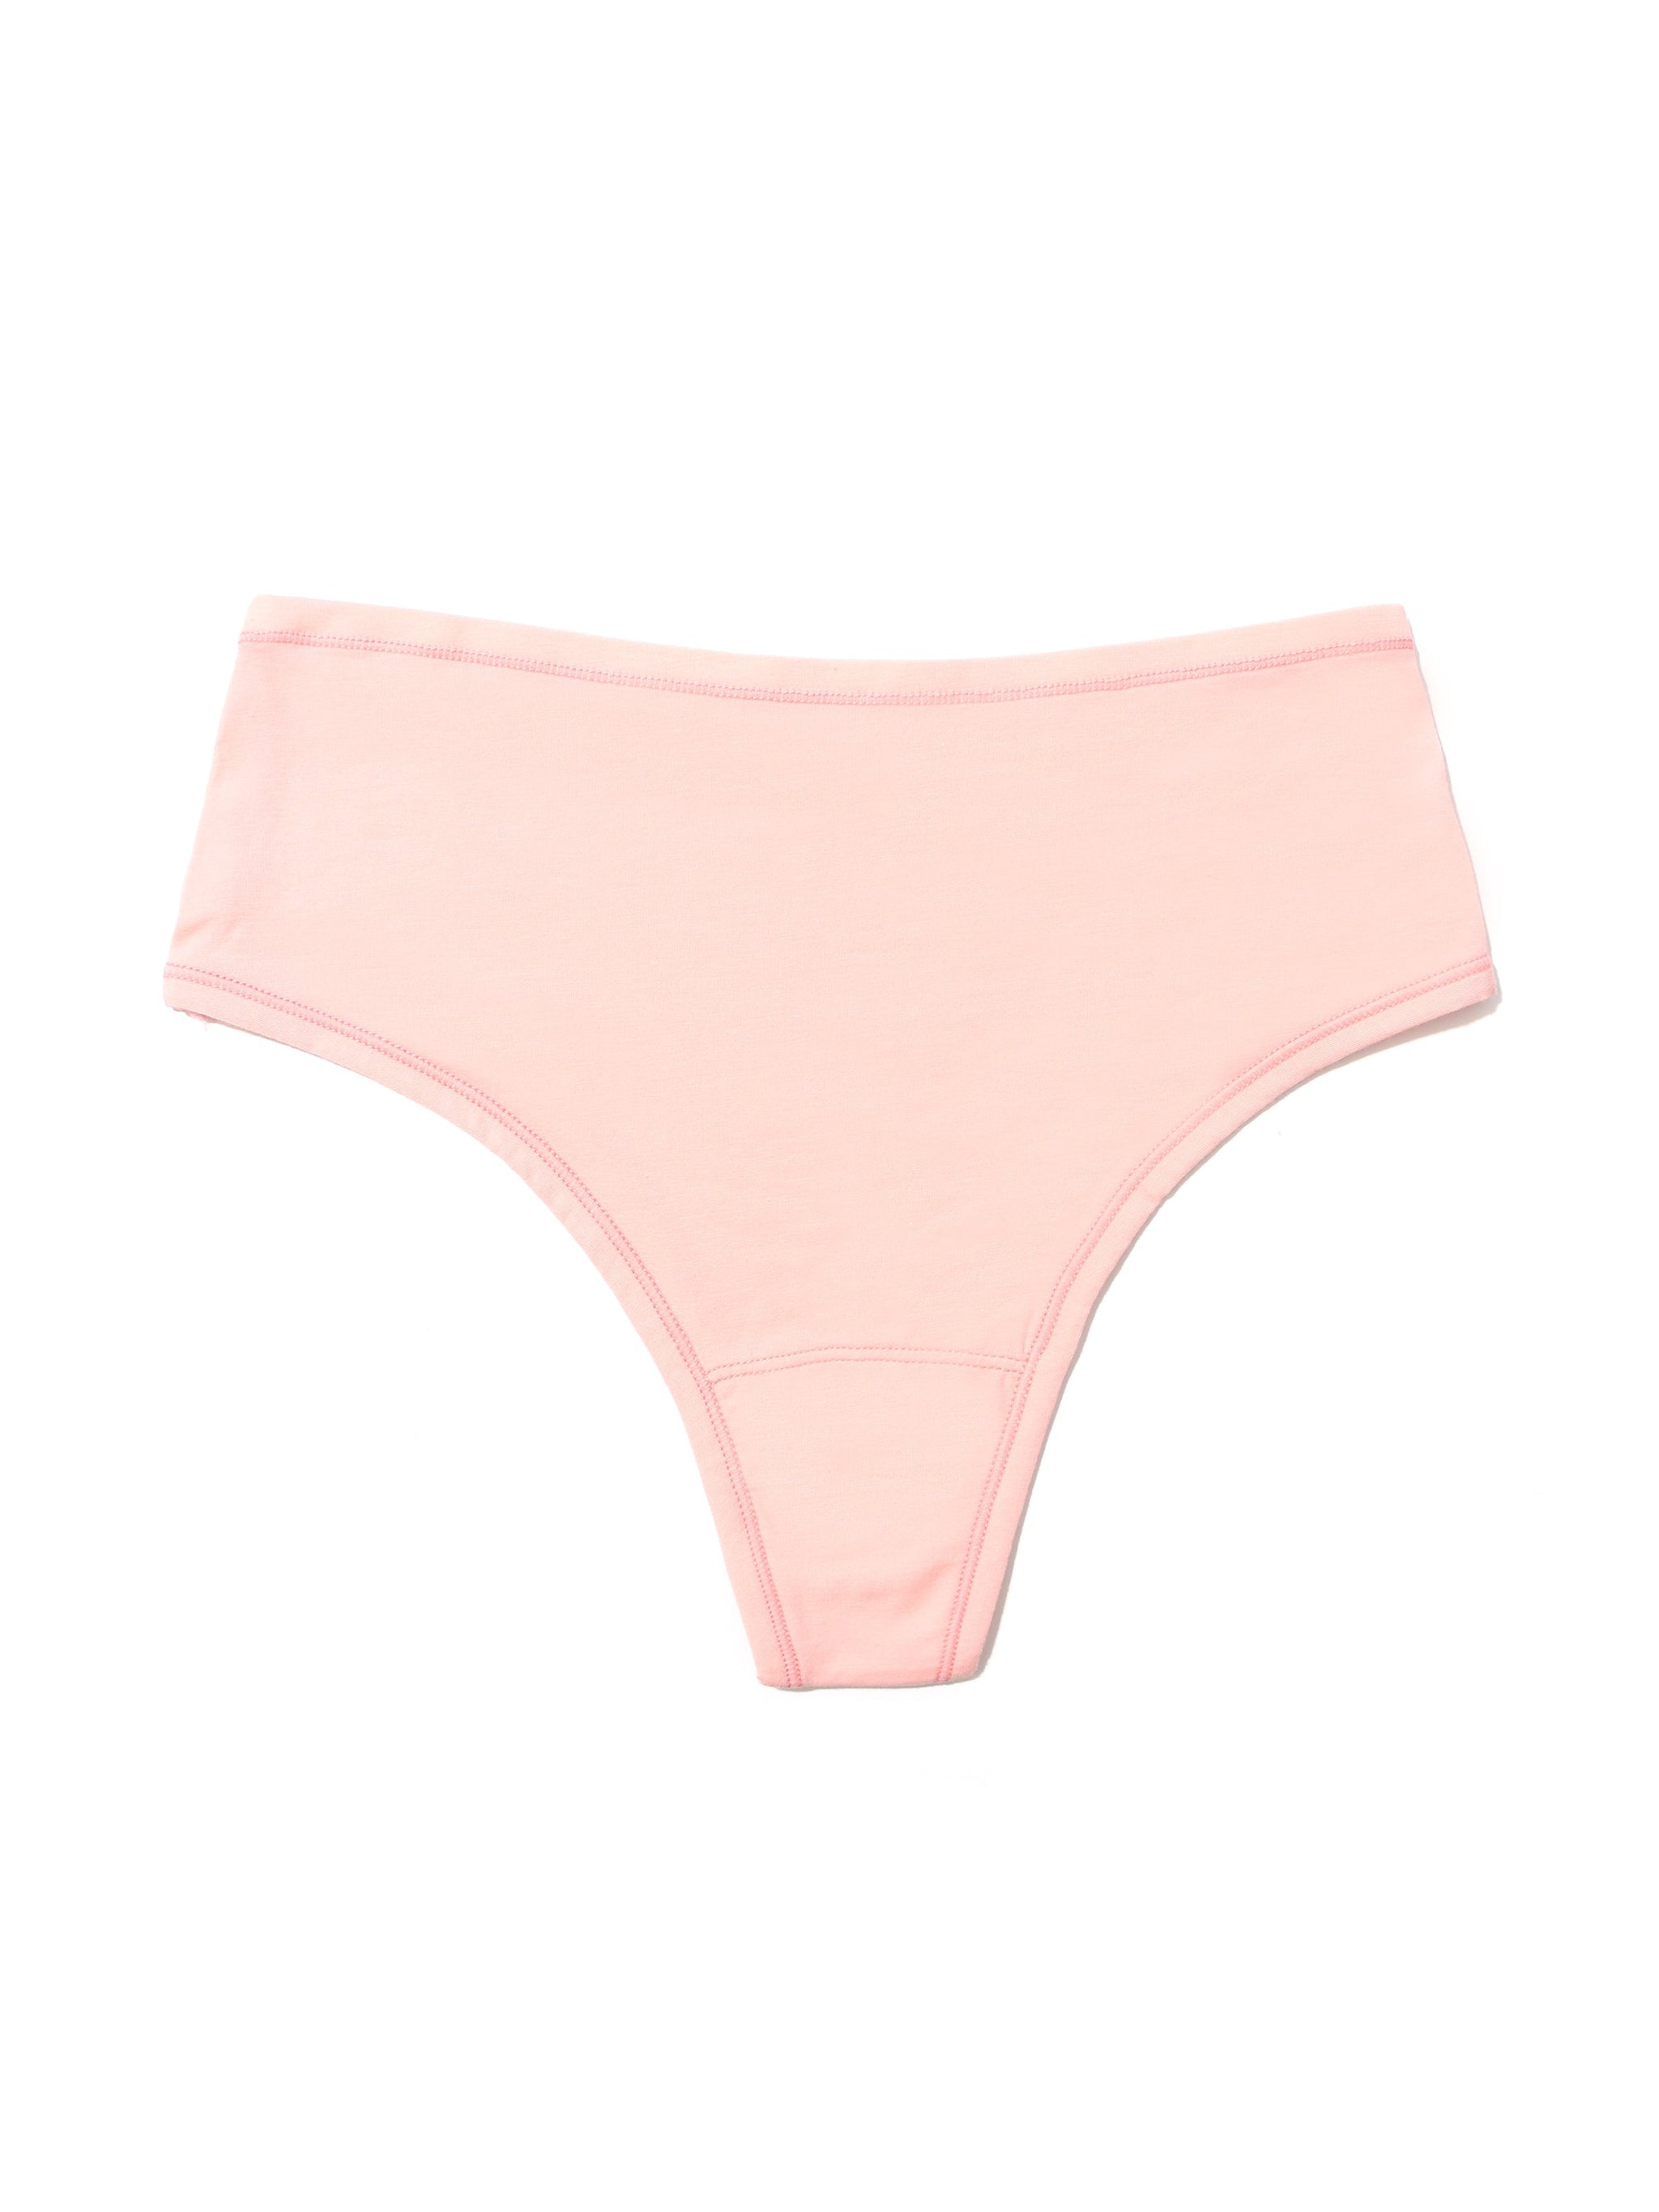 New 481822 Hanky Panky Salmon Pink With Silver Shine Thong